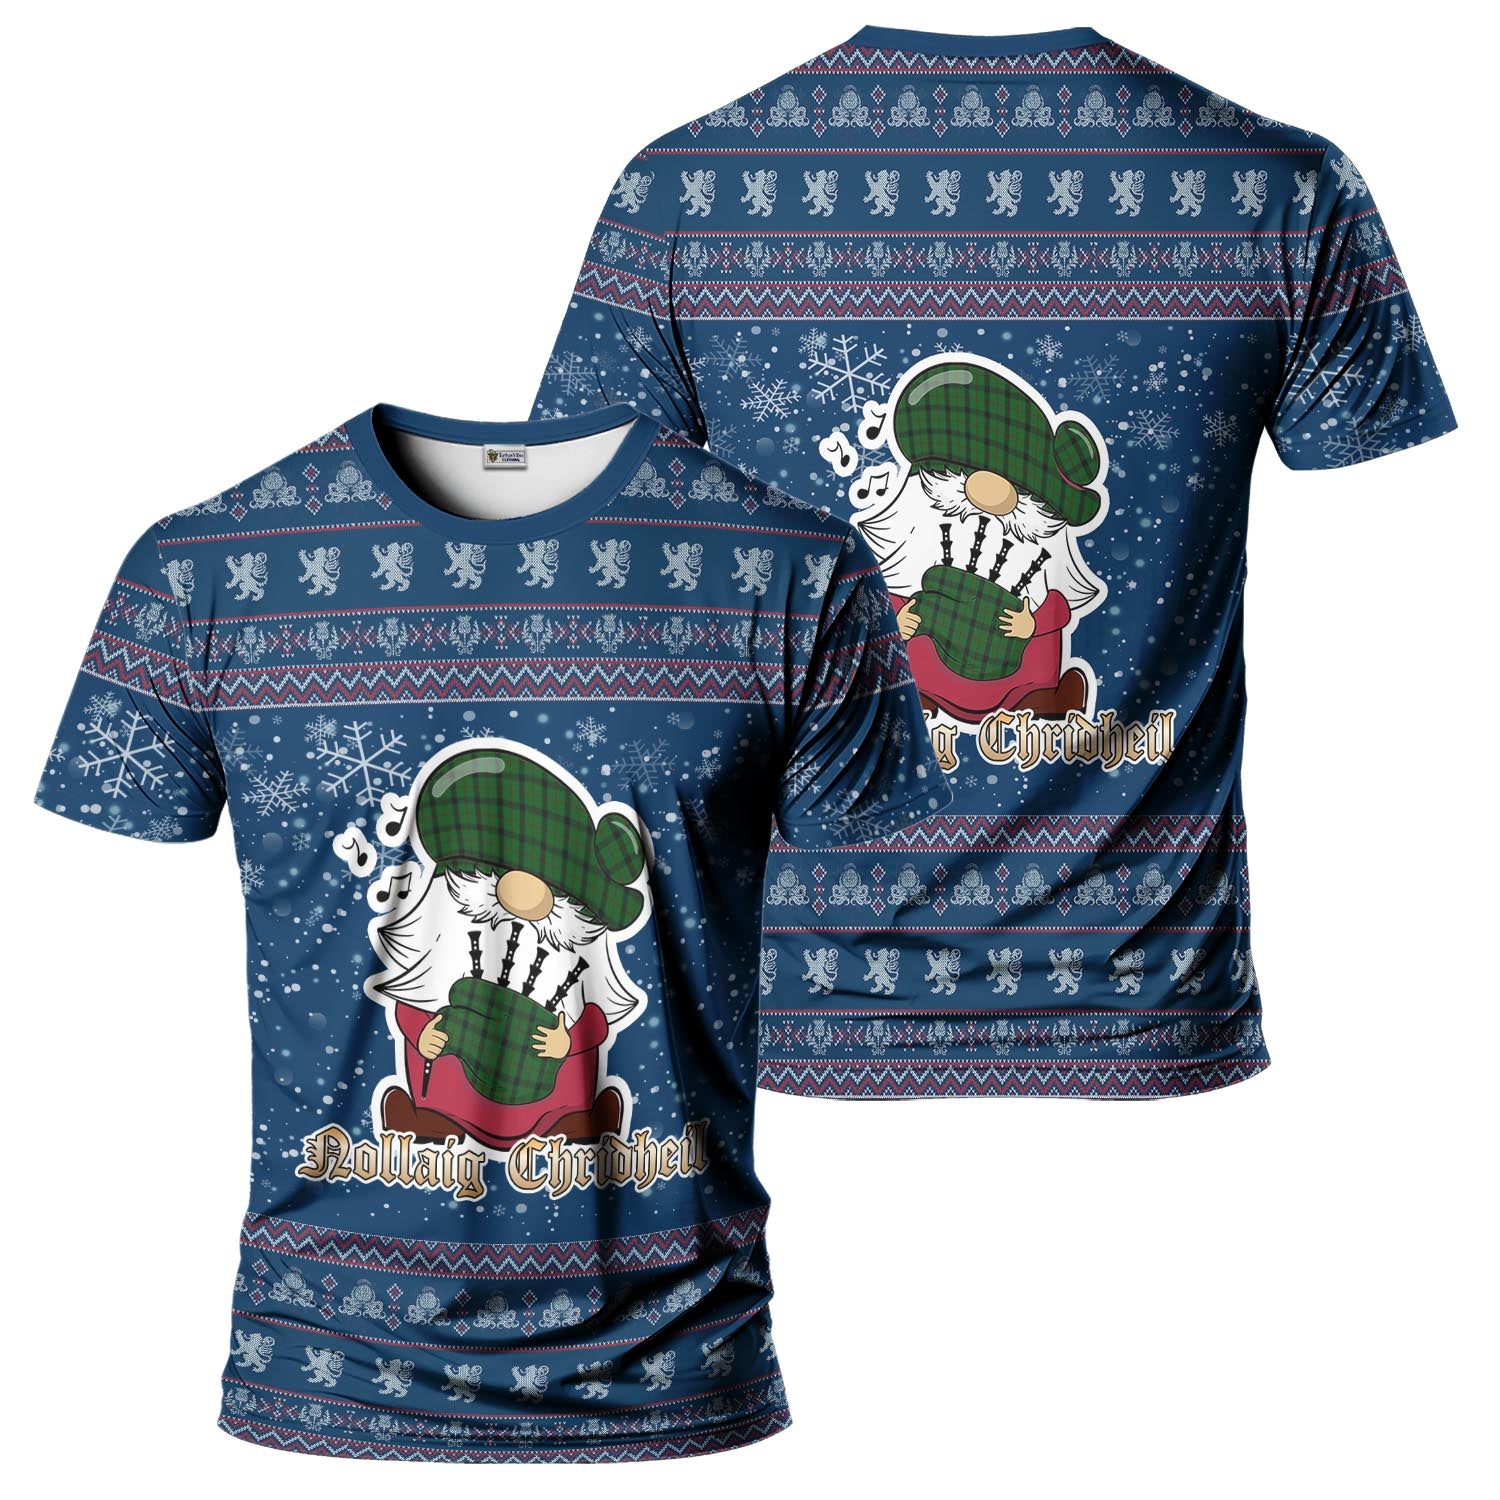 Kincaid Clan Christmas Family T-Shirt with Funny Gnome Playing Bagpipes Kid's Shirt Blue - Tartanvibesclothing